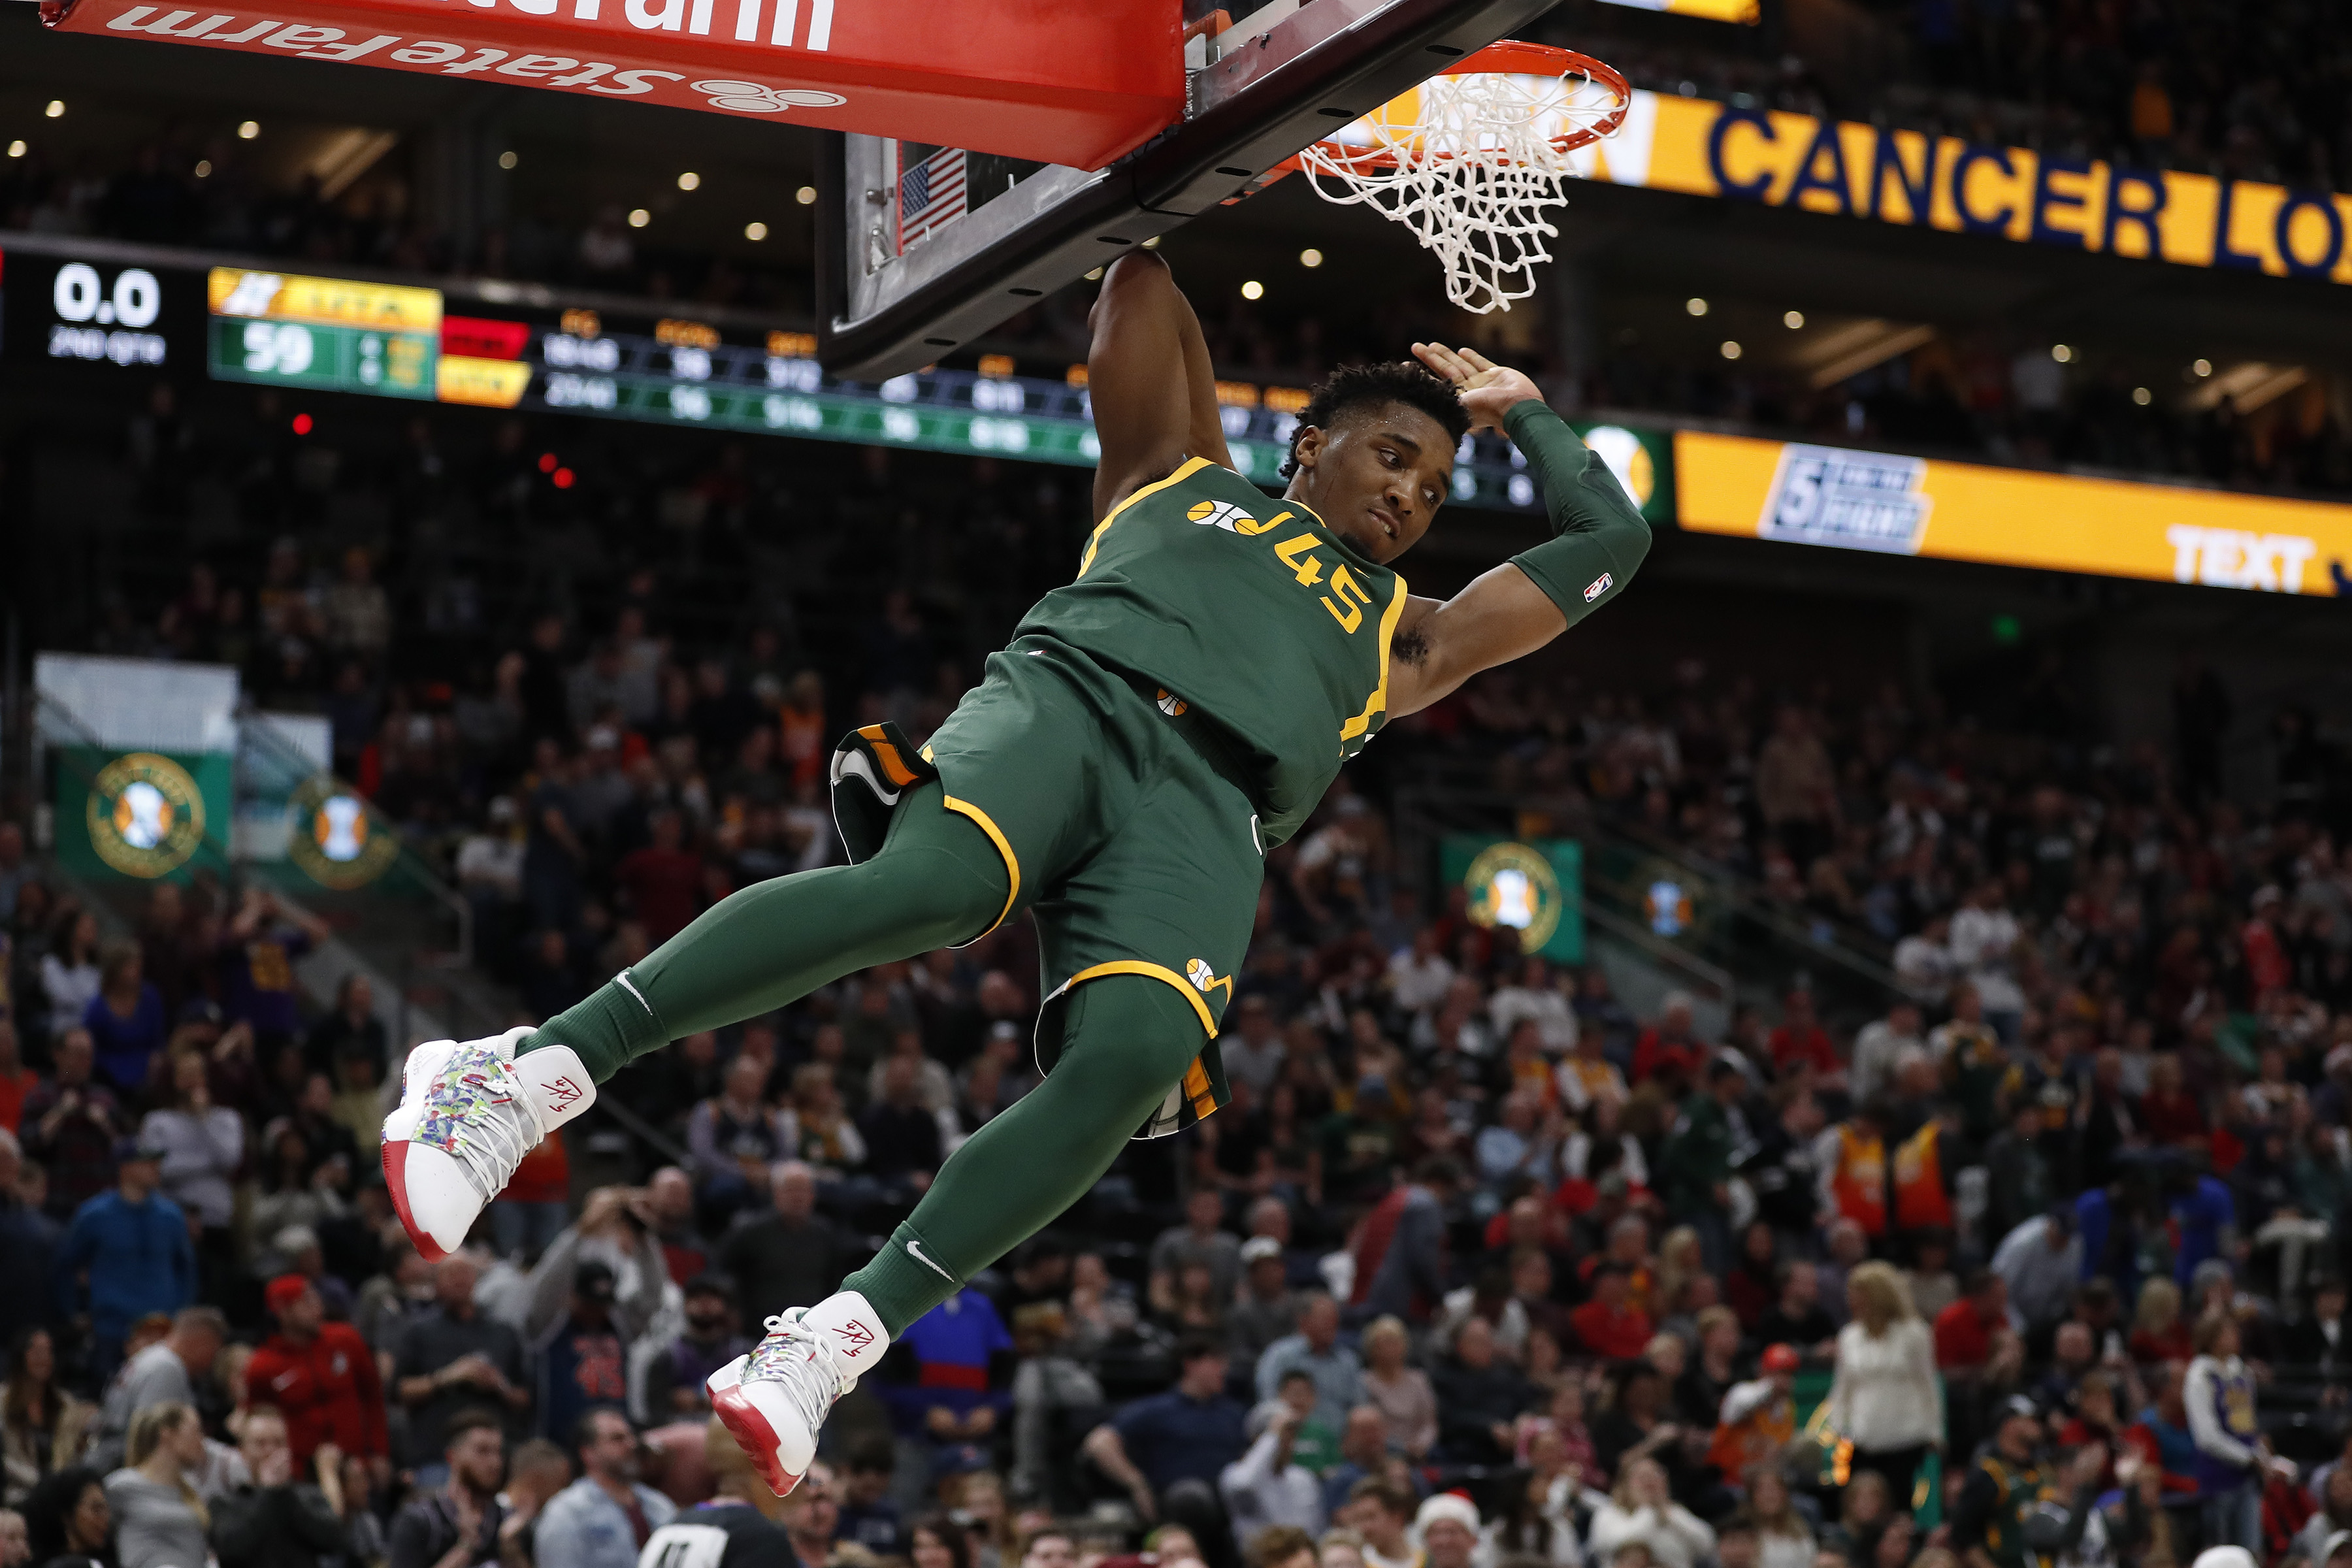 Louisville basketball: Donovan Mitchell to compete in NBA Slam Dunk Contest